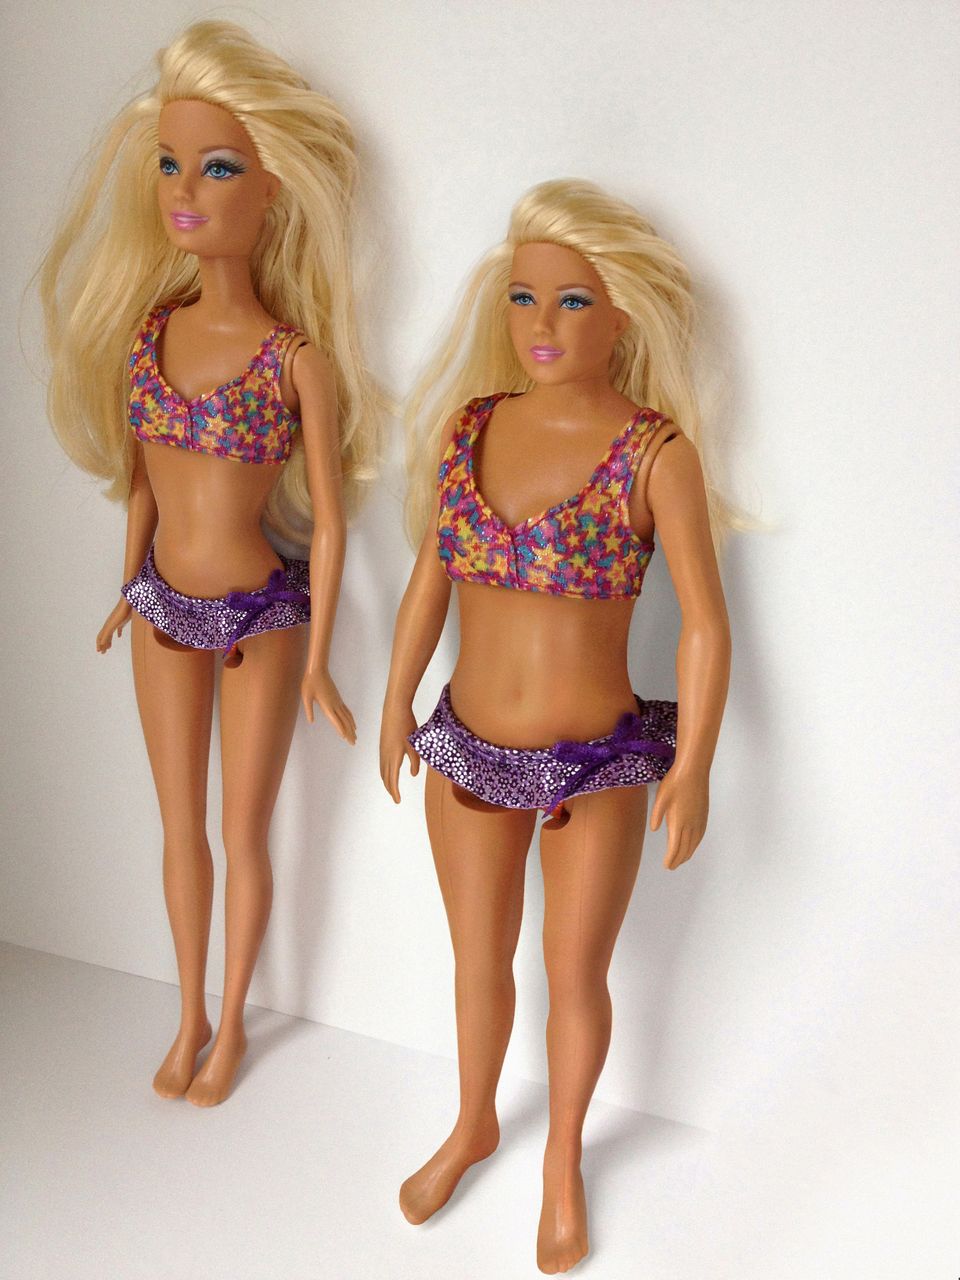 Normal' Barbie By Nickolay Lamm Shows Us What Mattel Dolls Might